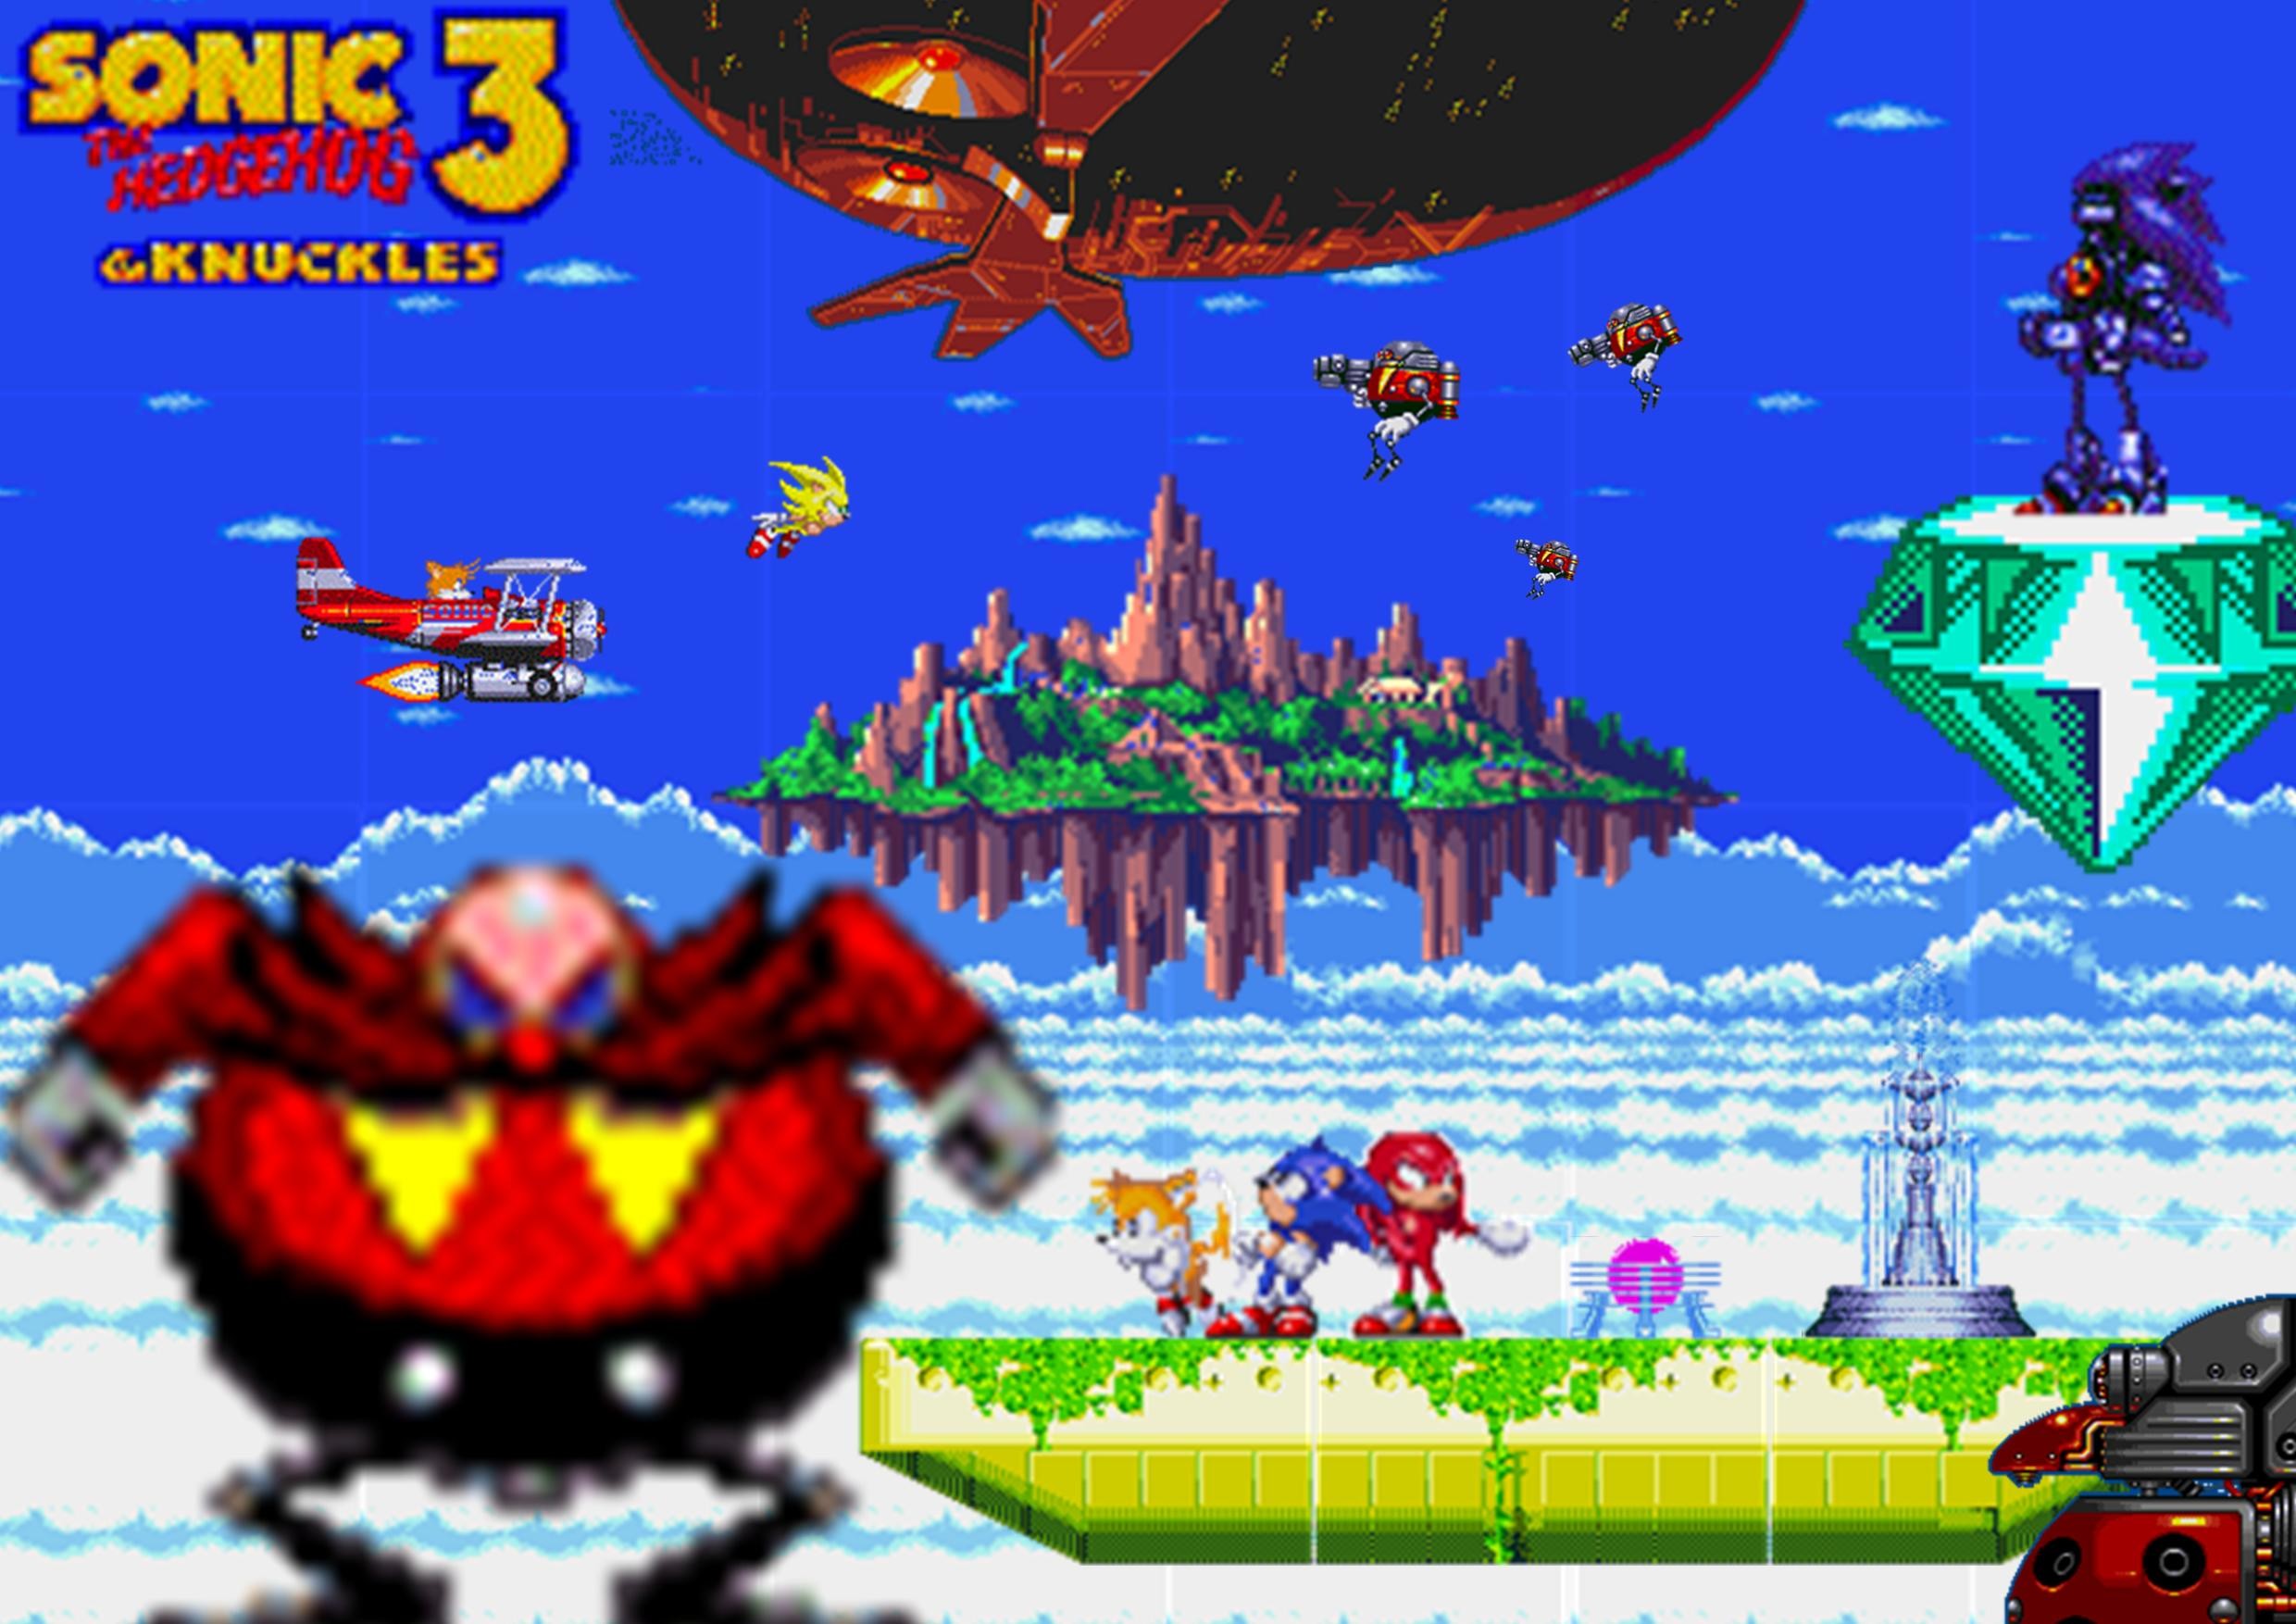 2480x1754 Sonic 3 and Knuckles Wallpaper by Rove1989 on DeviantArt